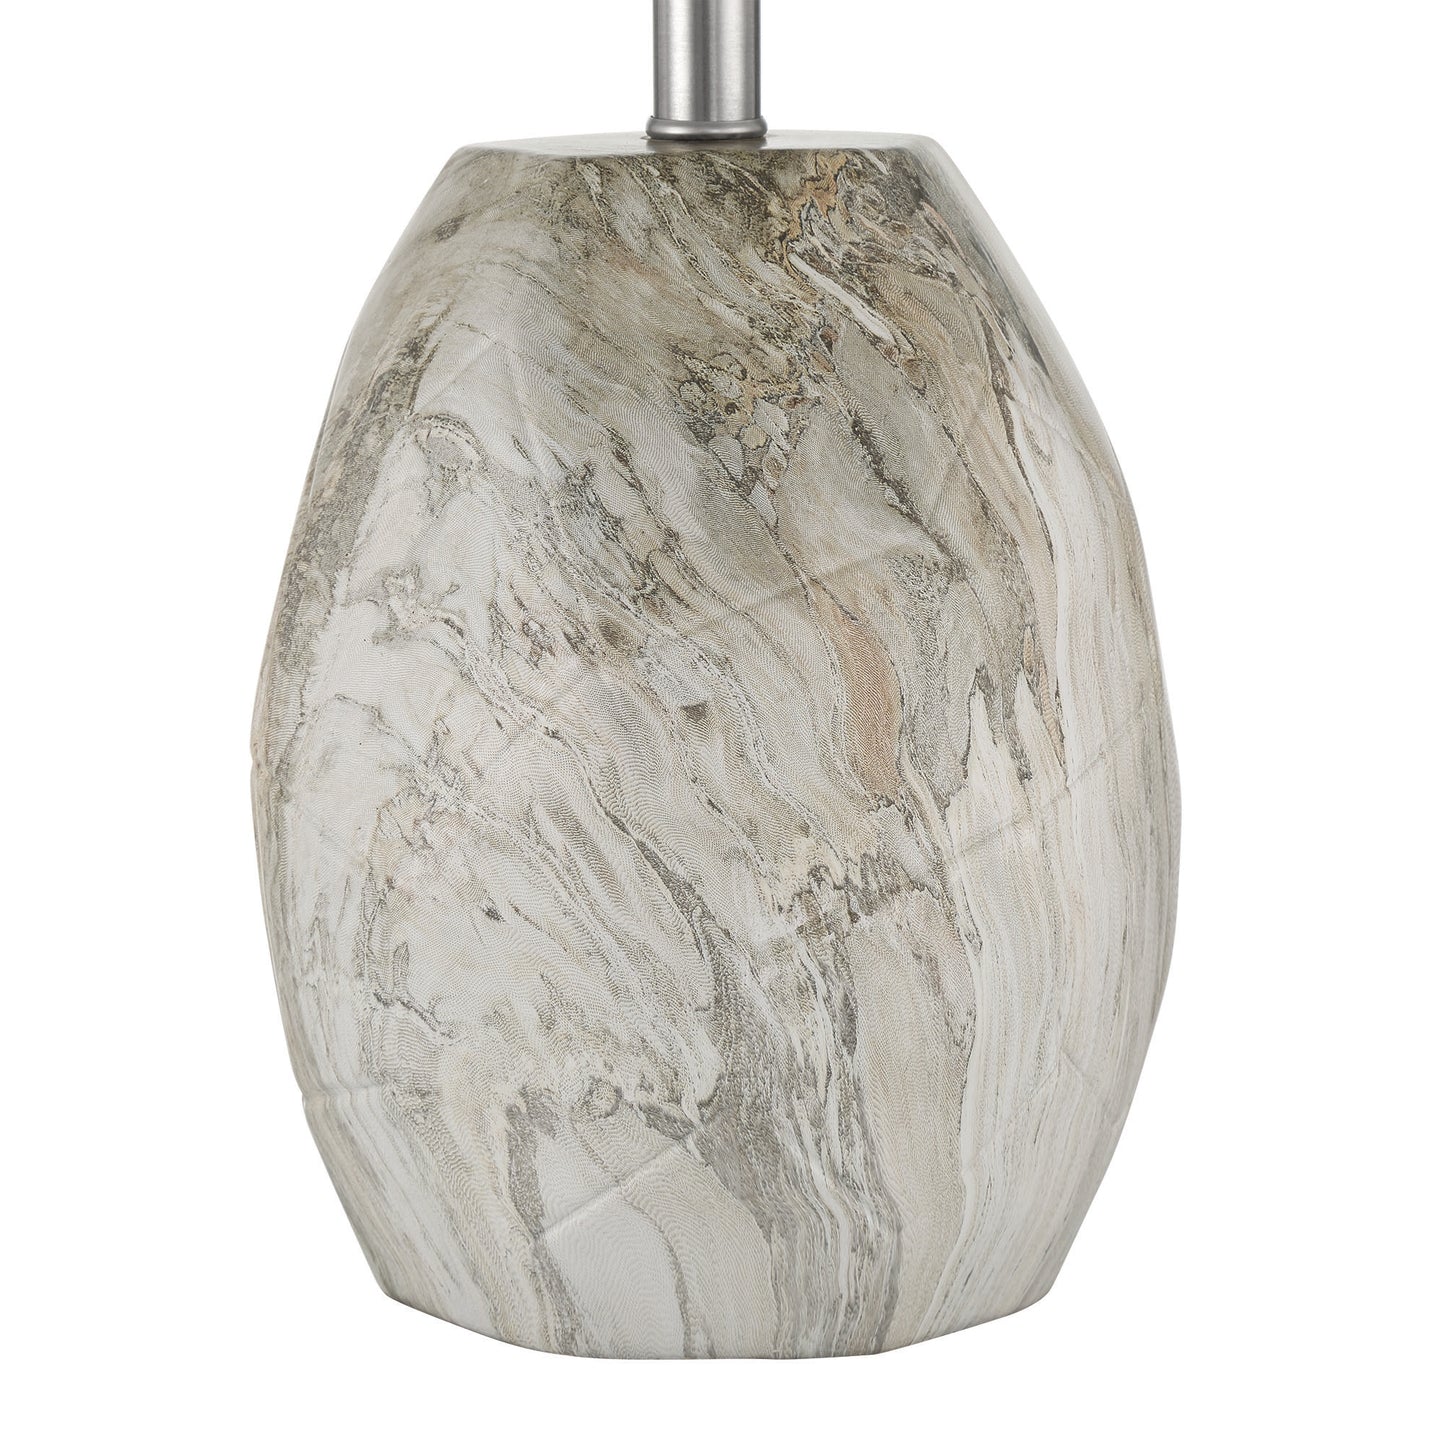 1 light marble ceramic table lamp set of 2 (5) by ACROMA